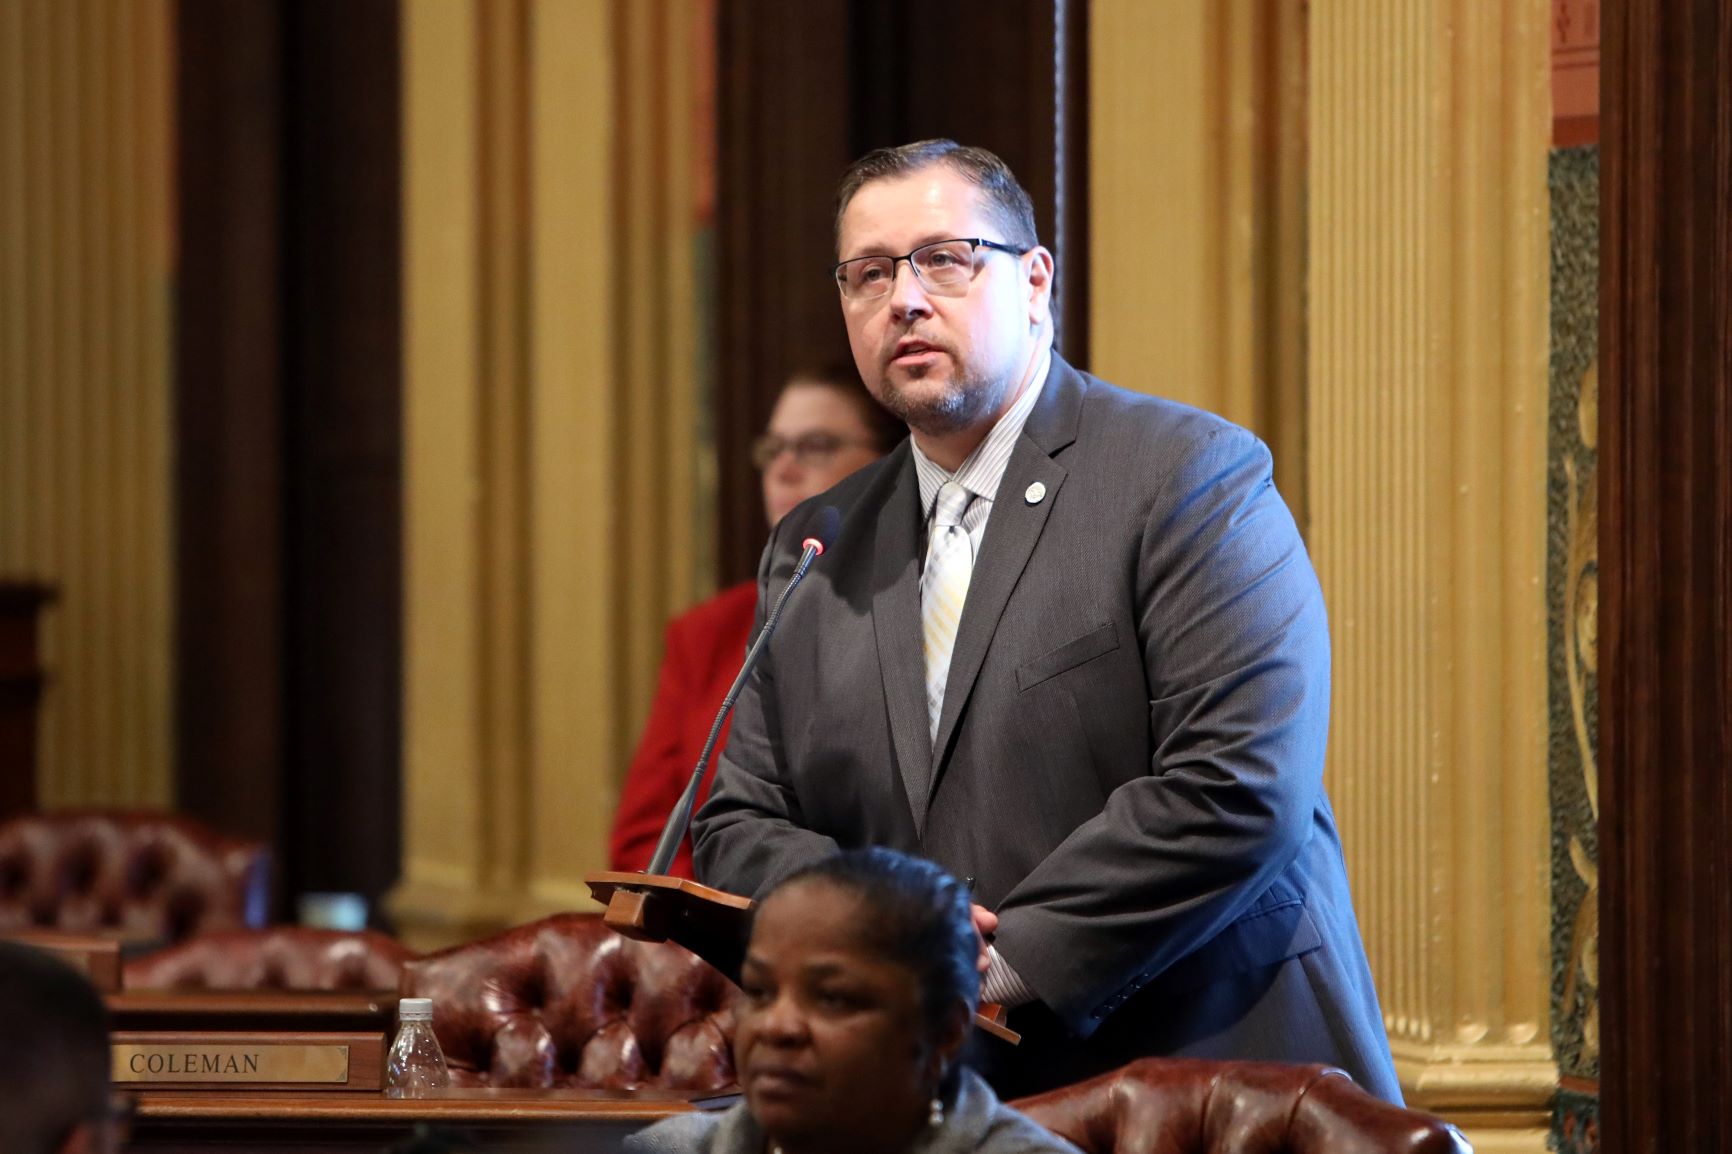 State Rep. Brian Elder (D-Bay City) was joined by SVSU President Donald Bachand for Gov. Whitmer’s second State of the State address at the Capitol in Lansing on Wednesday, Jan. 29, 2020.